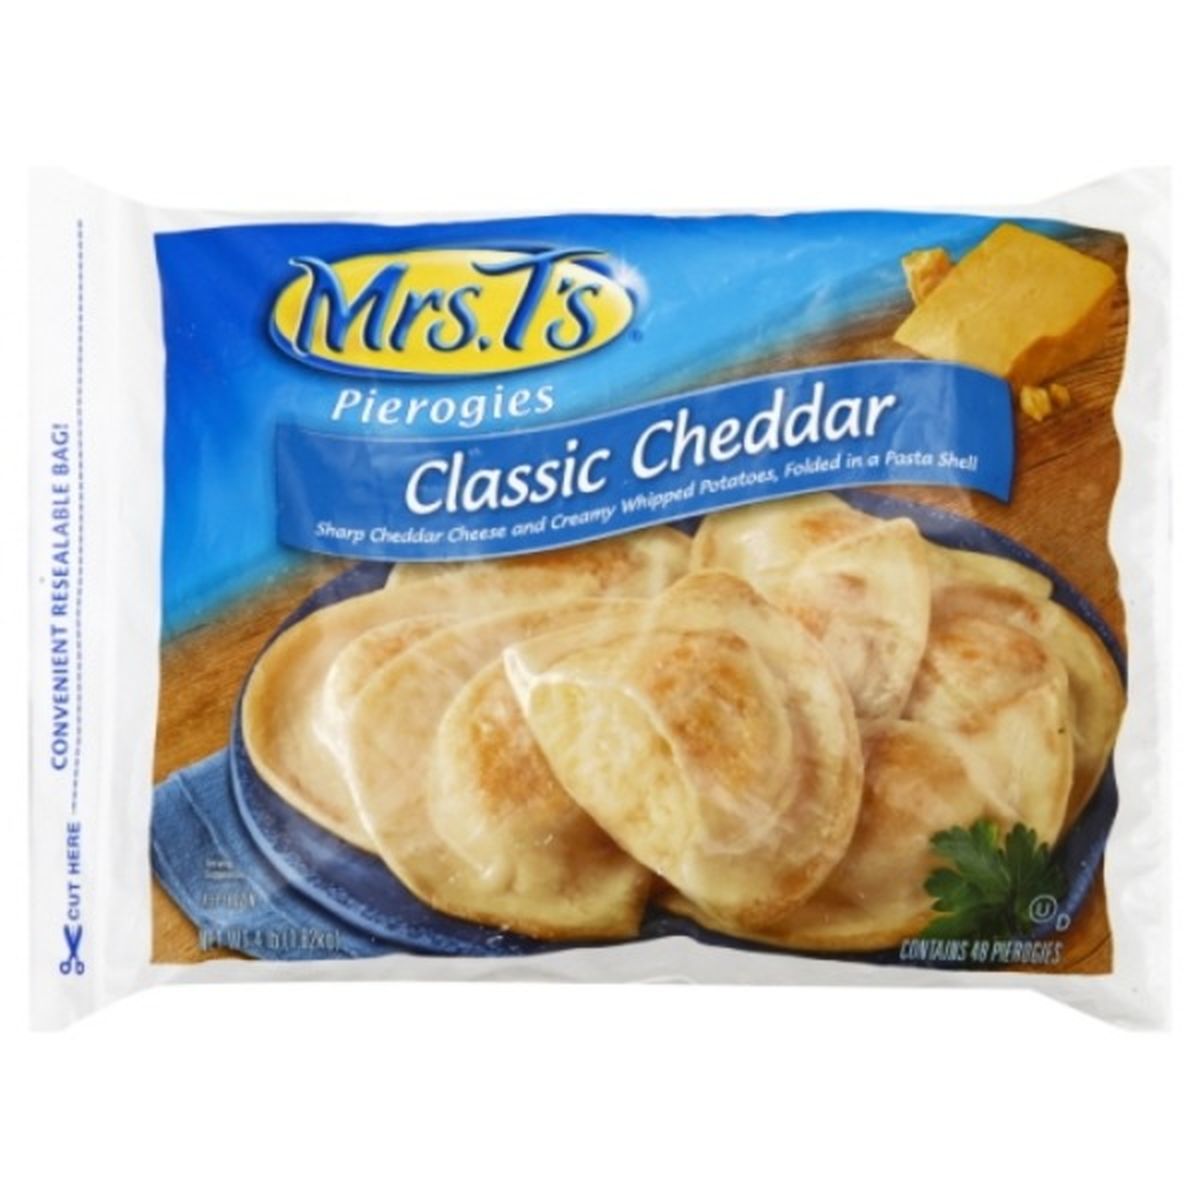 Calories in Mrs. T's Pierogies, Classic Cheddar